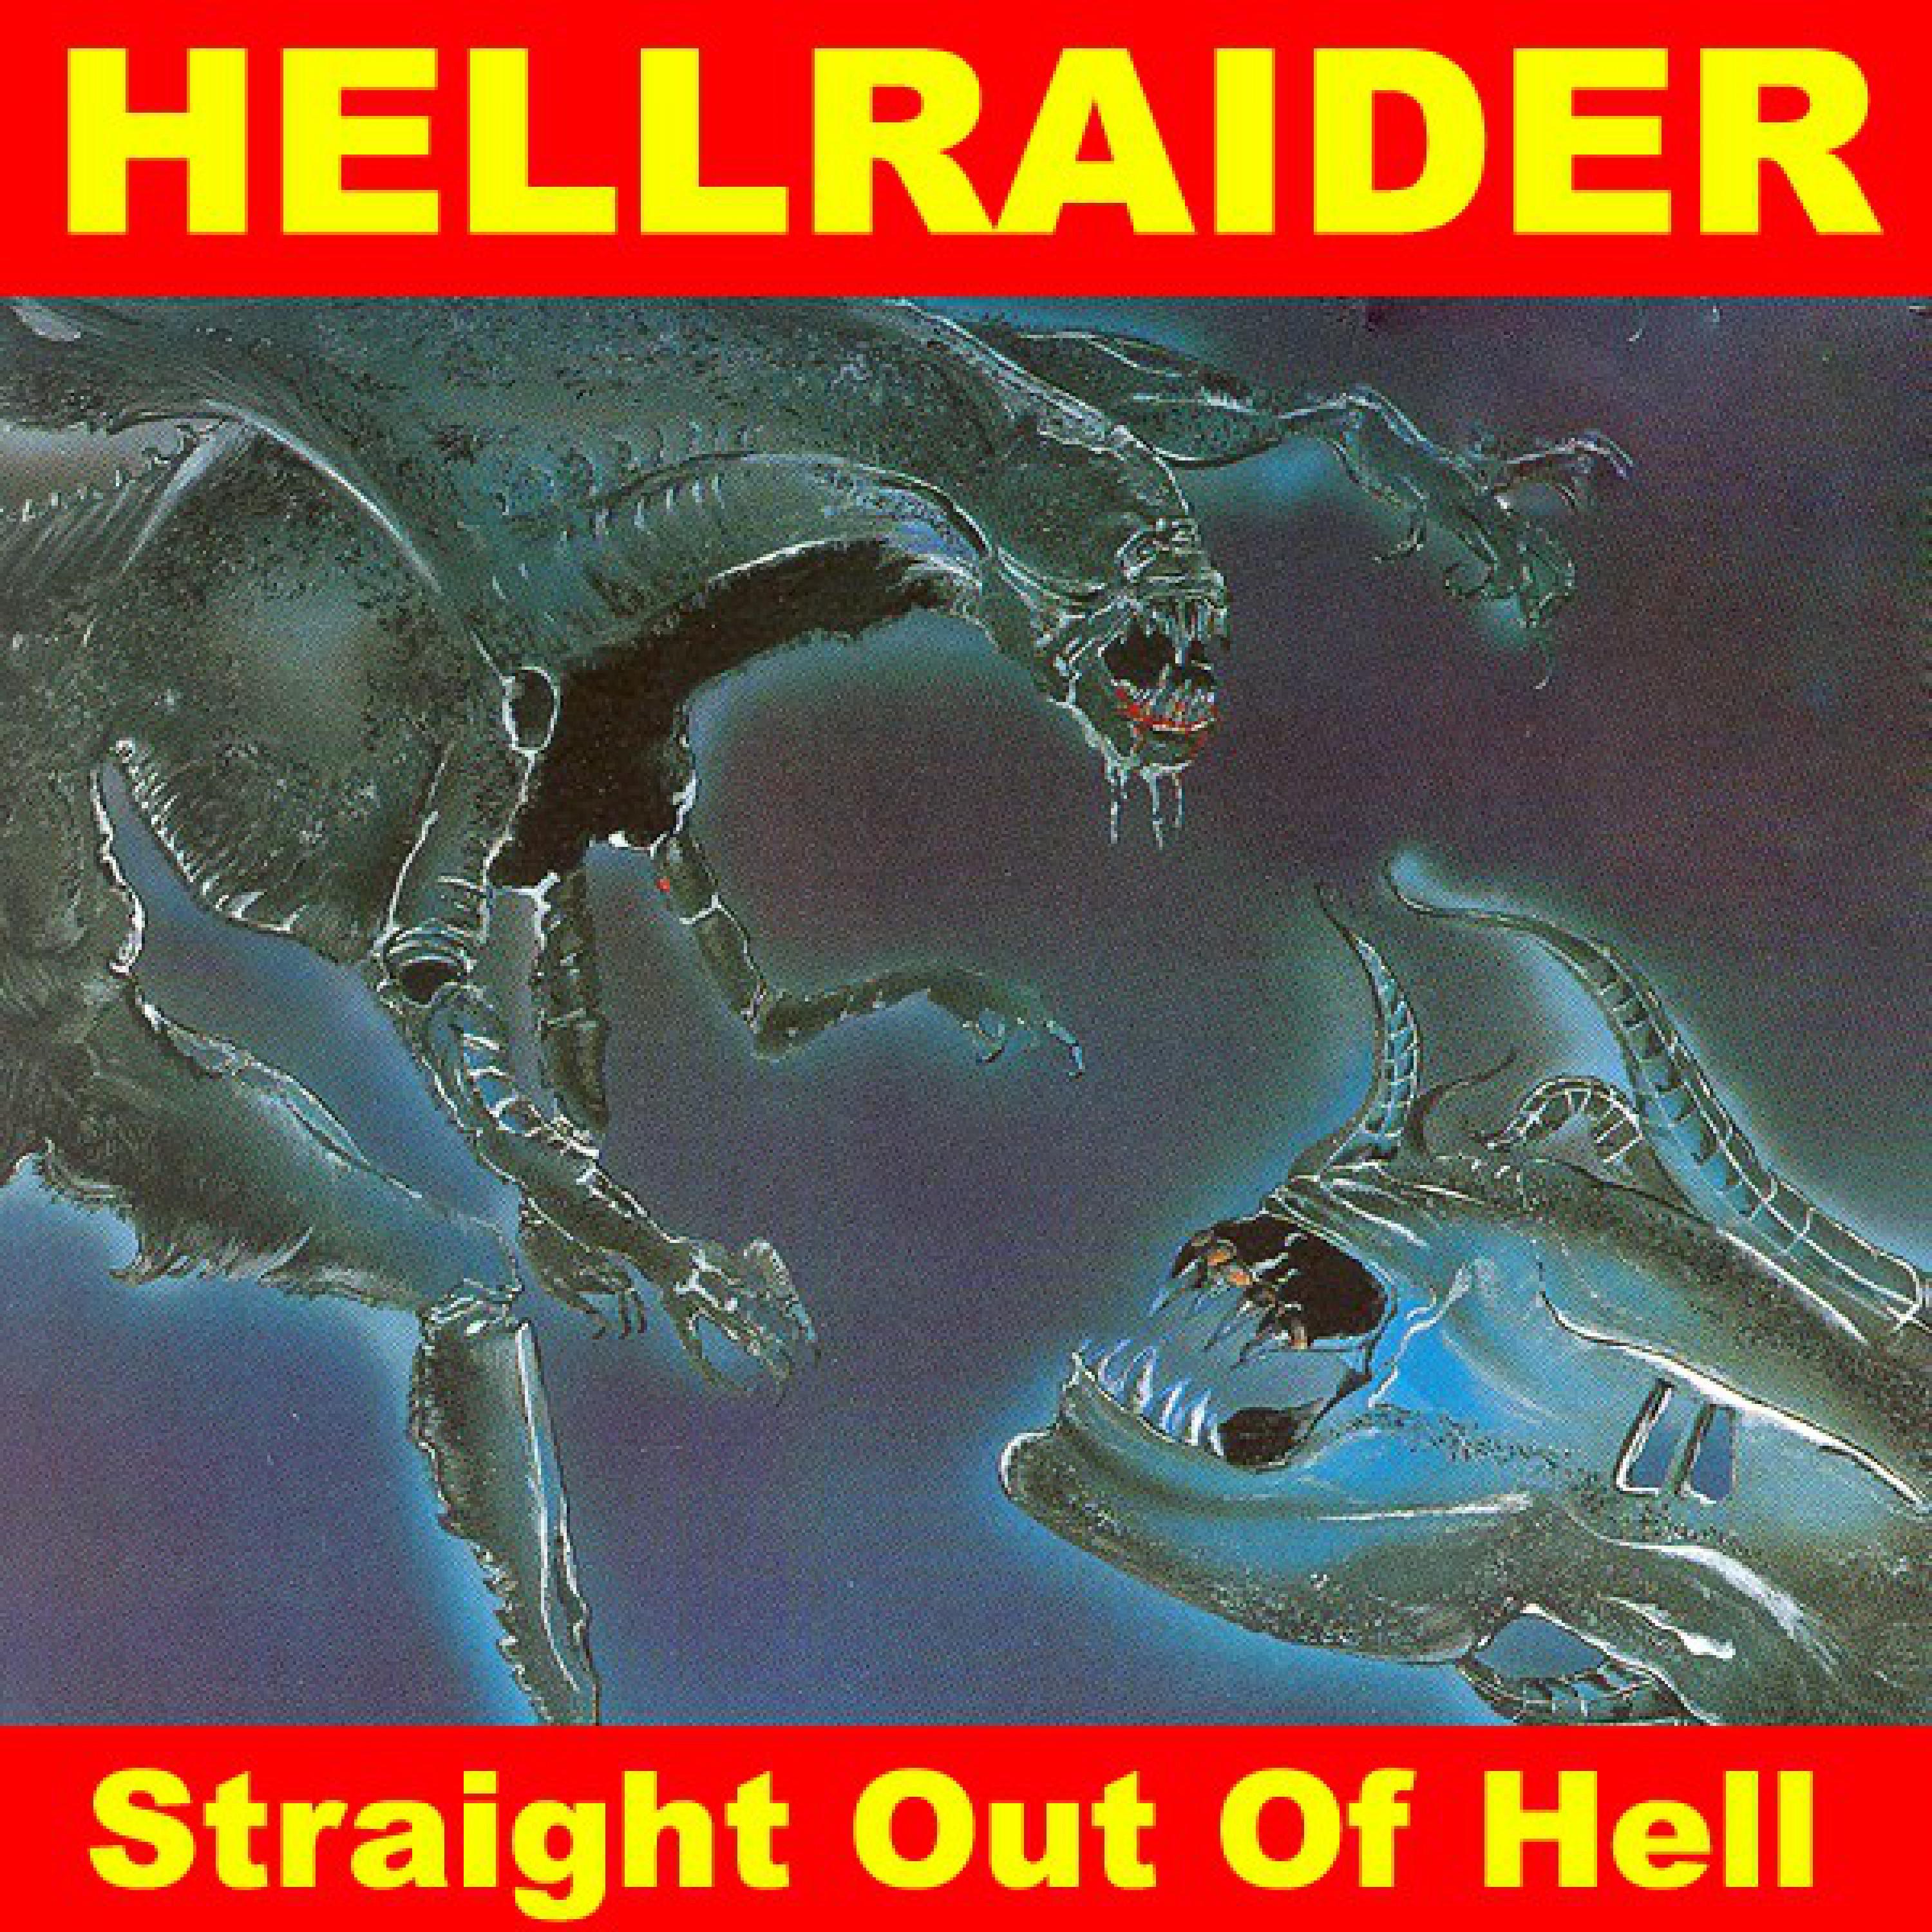 Hellraider (Straight out of Hell)